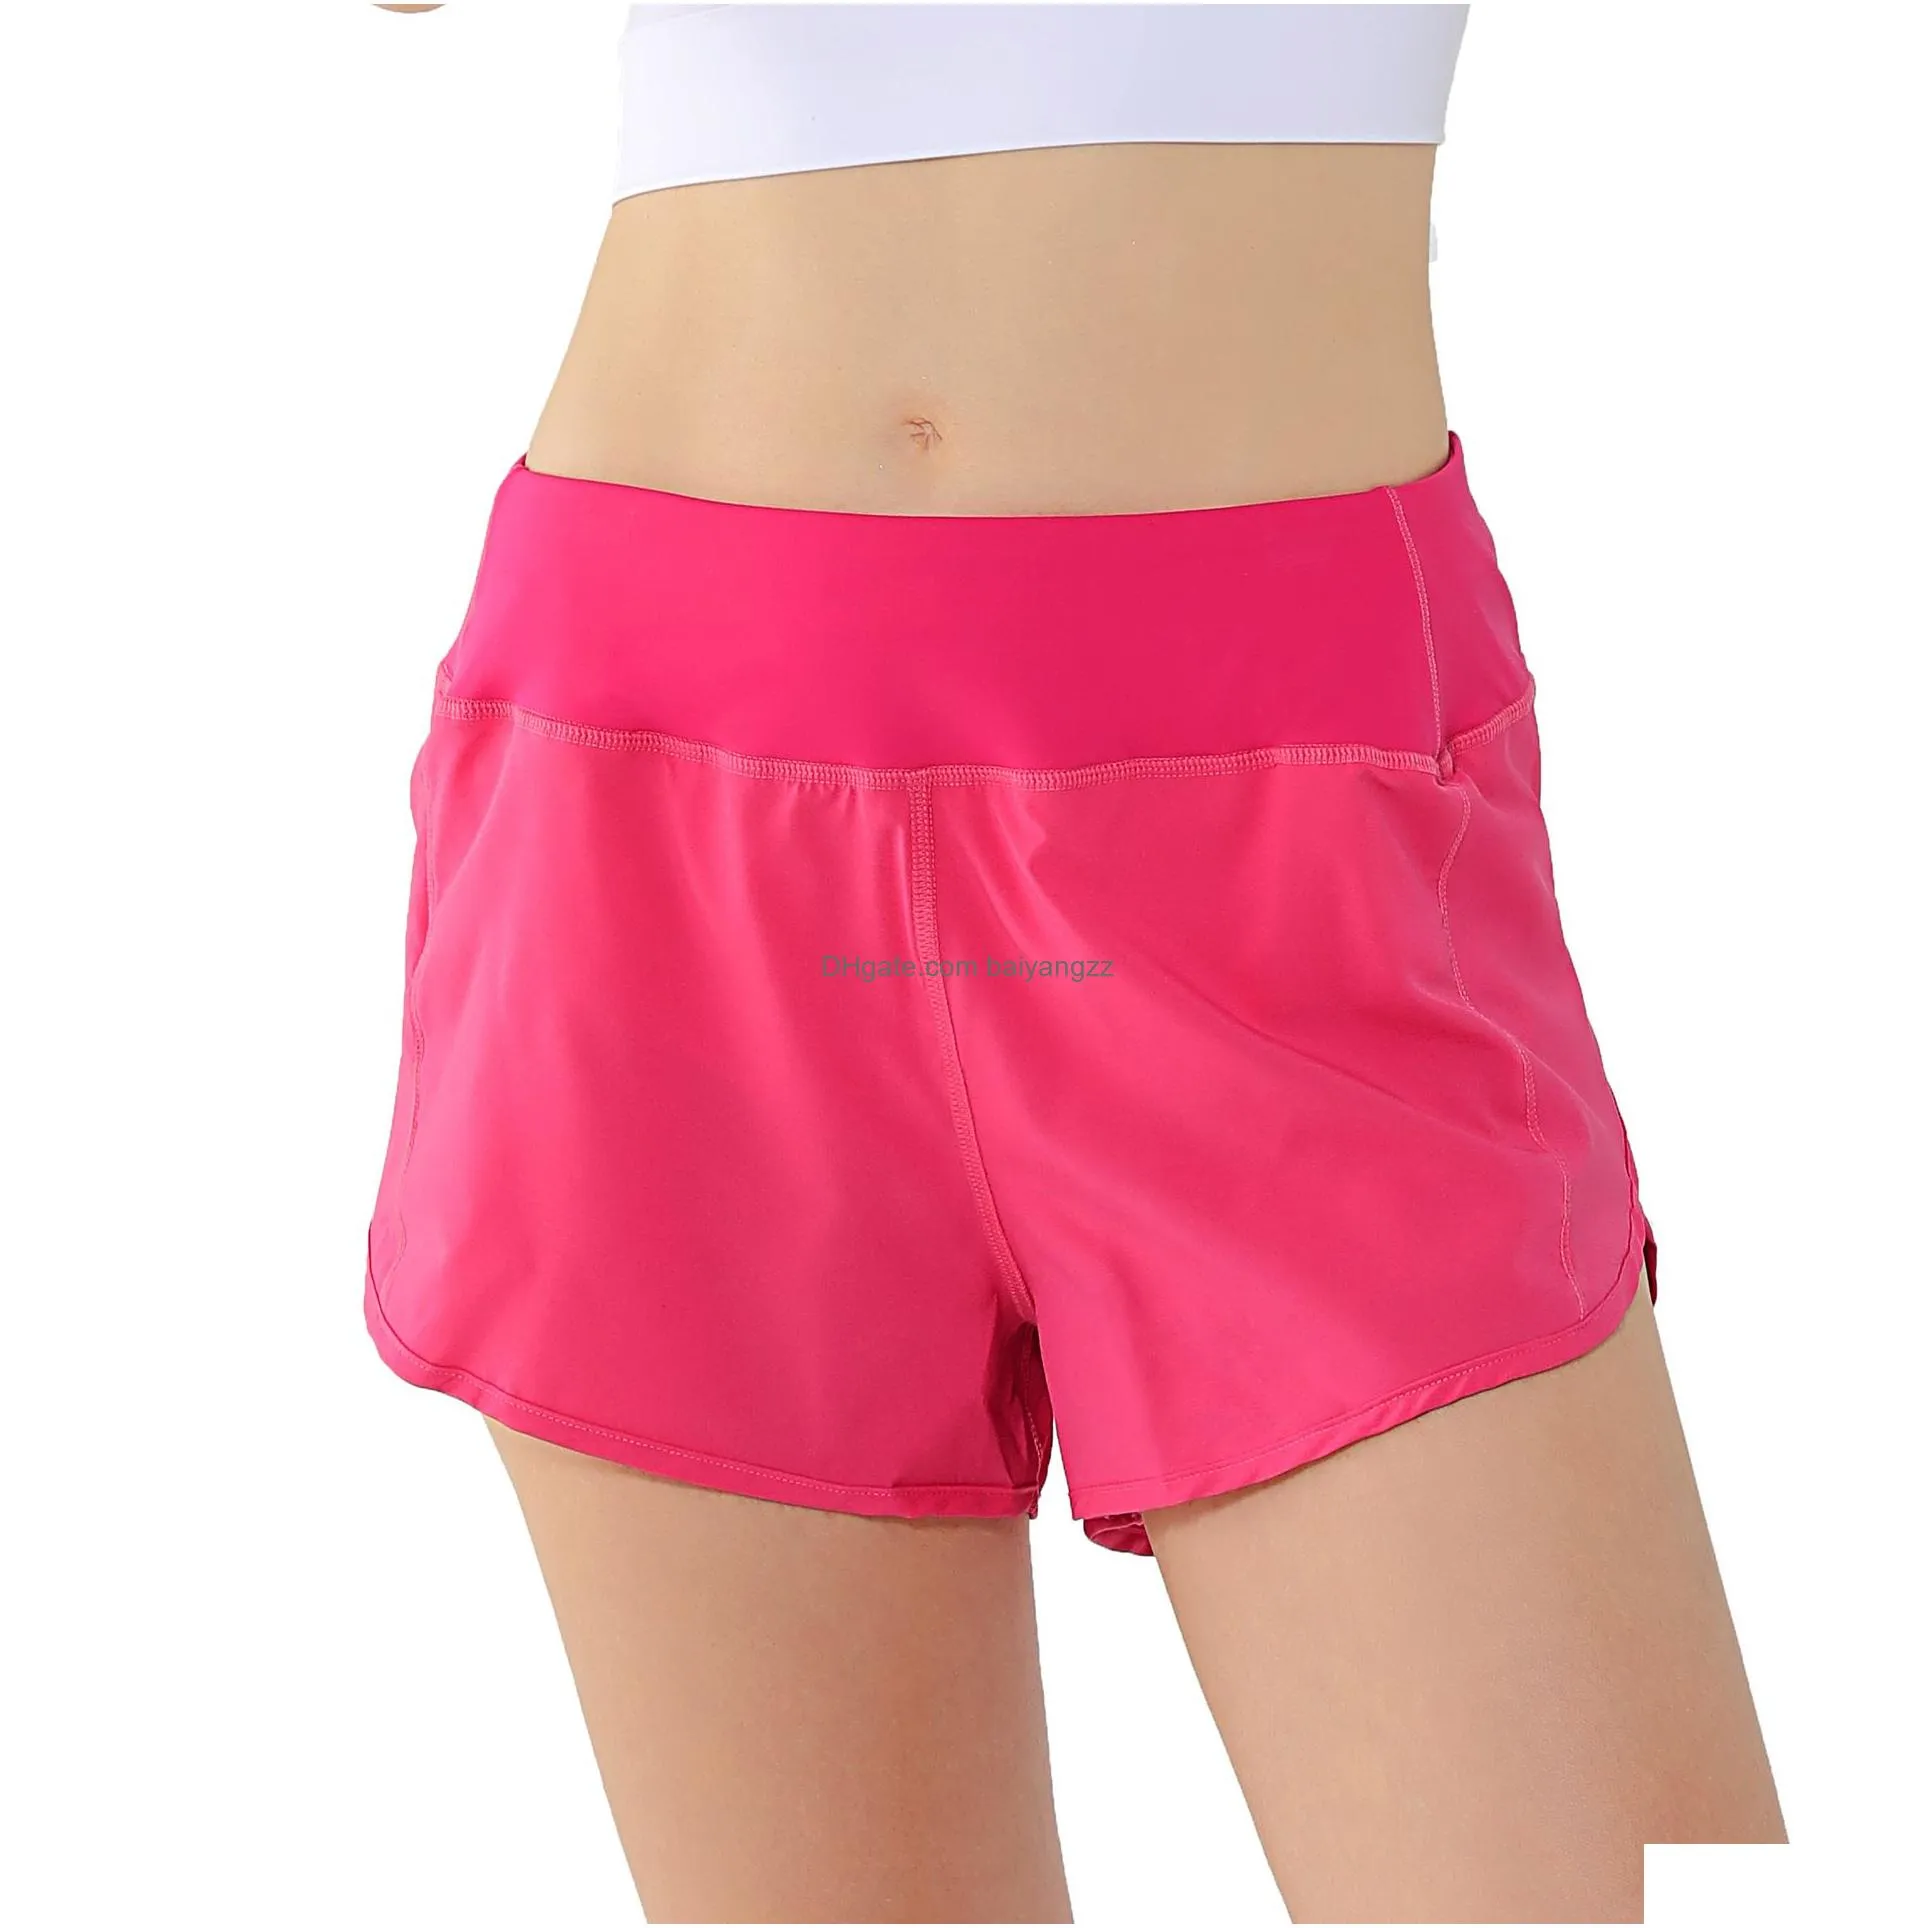  fashion top look trendy shorts high waisted athletic shorts for women workout biker running yoga gym tennis